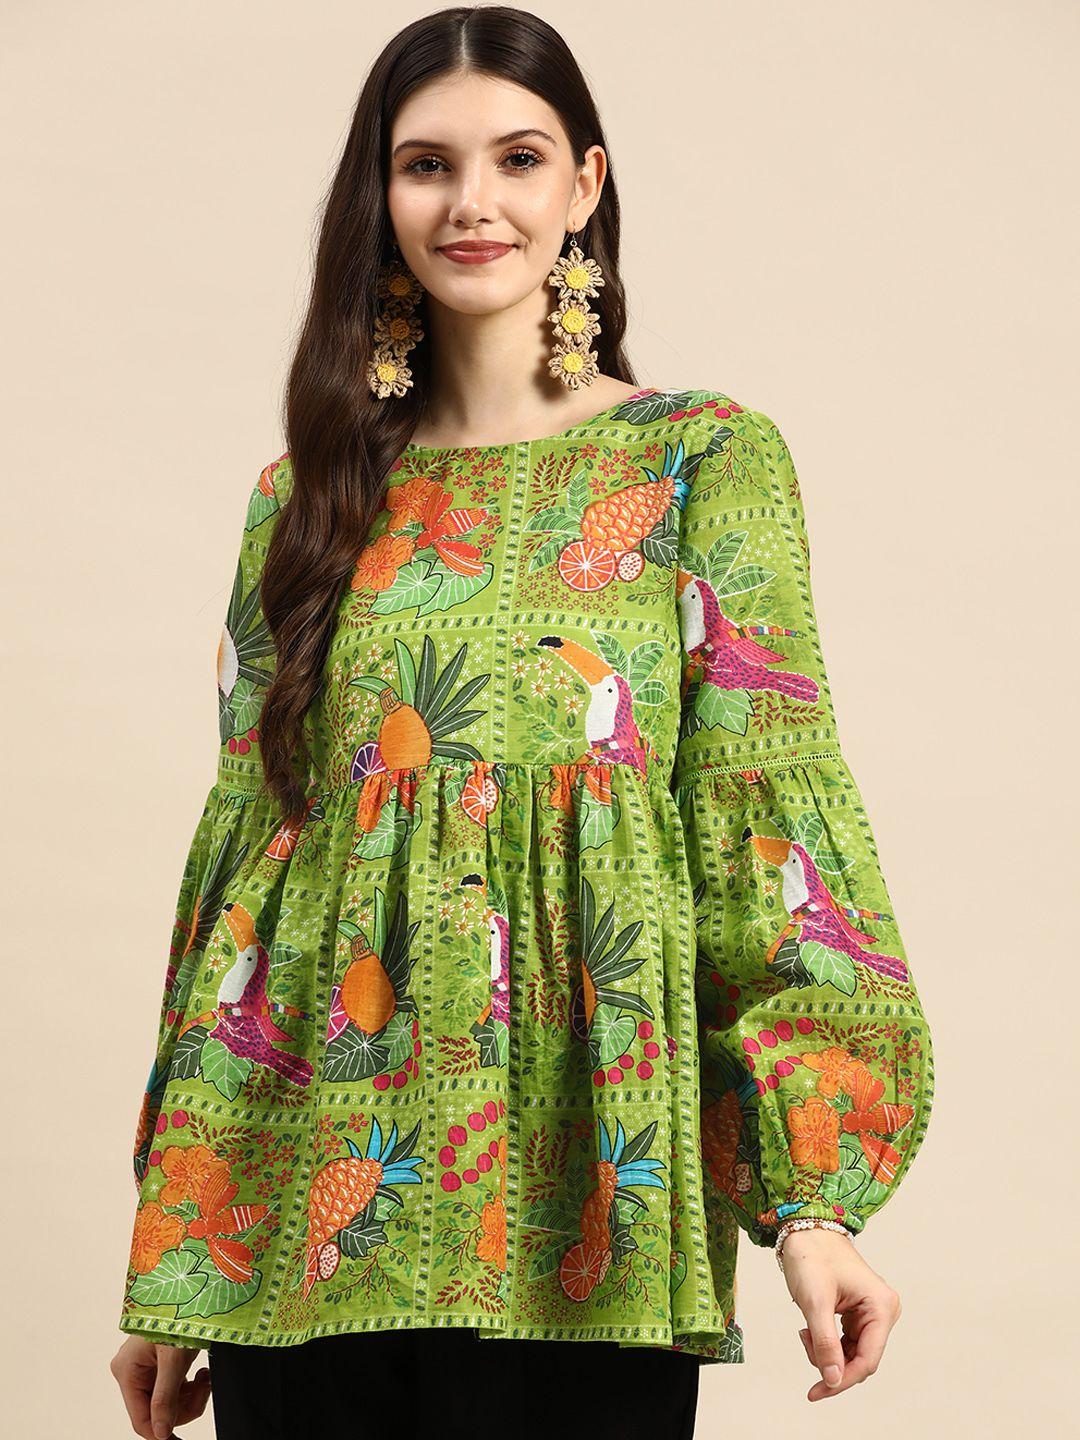 sangria-green-&-pink-floral-print-cotton-cinched-waist-top